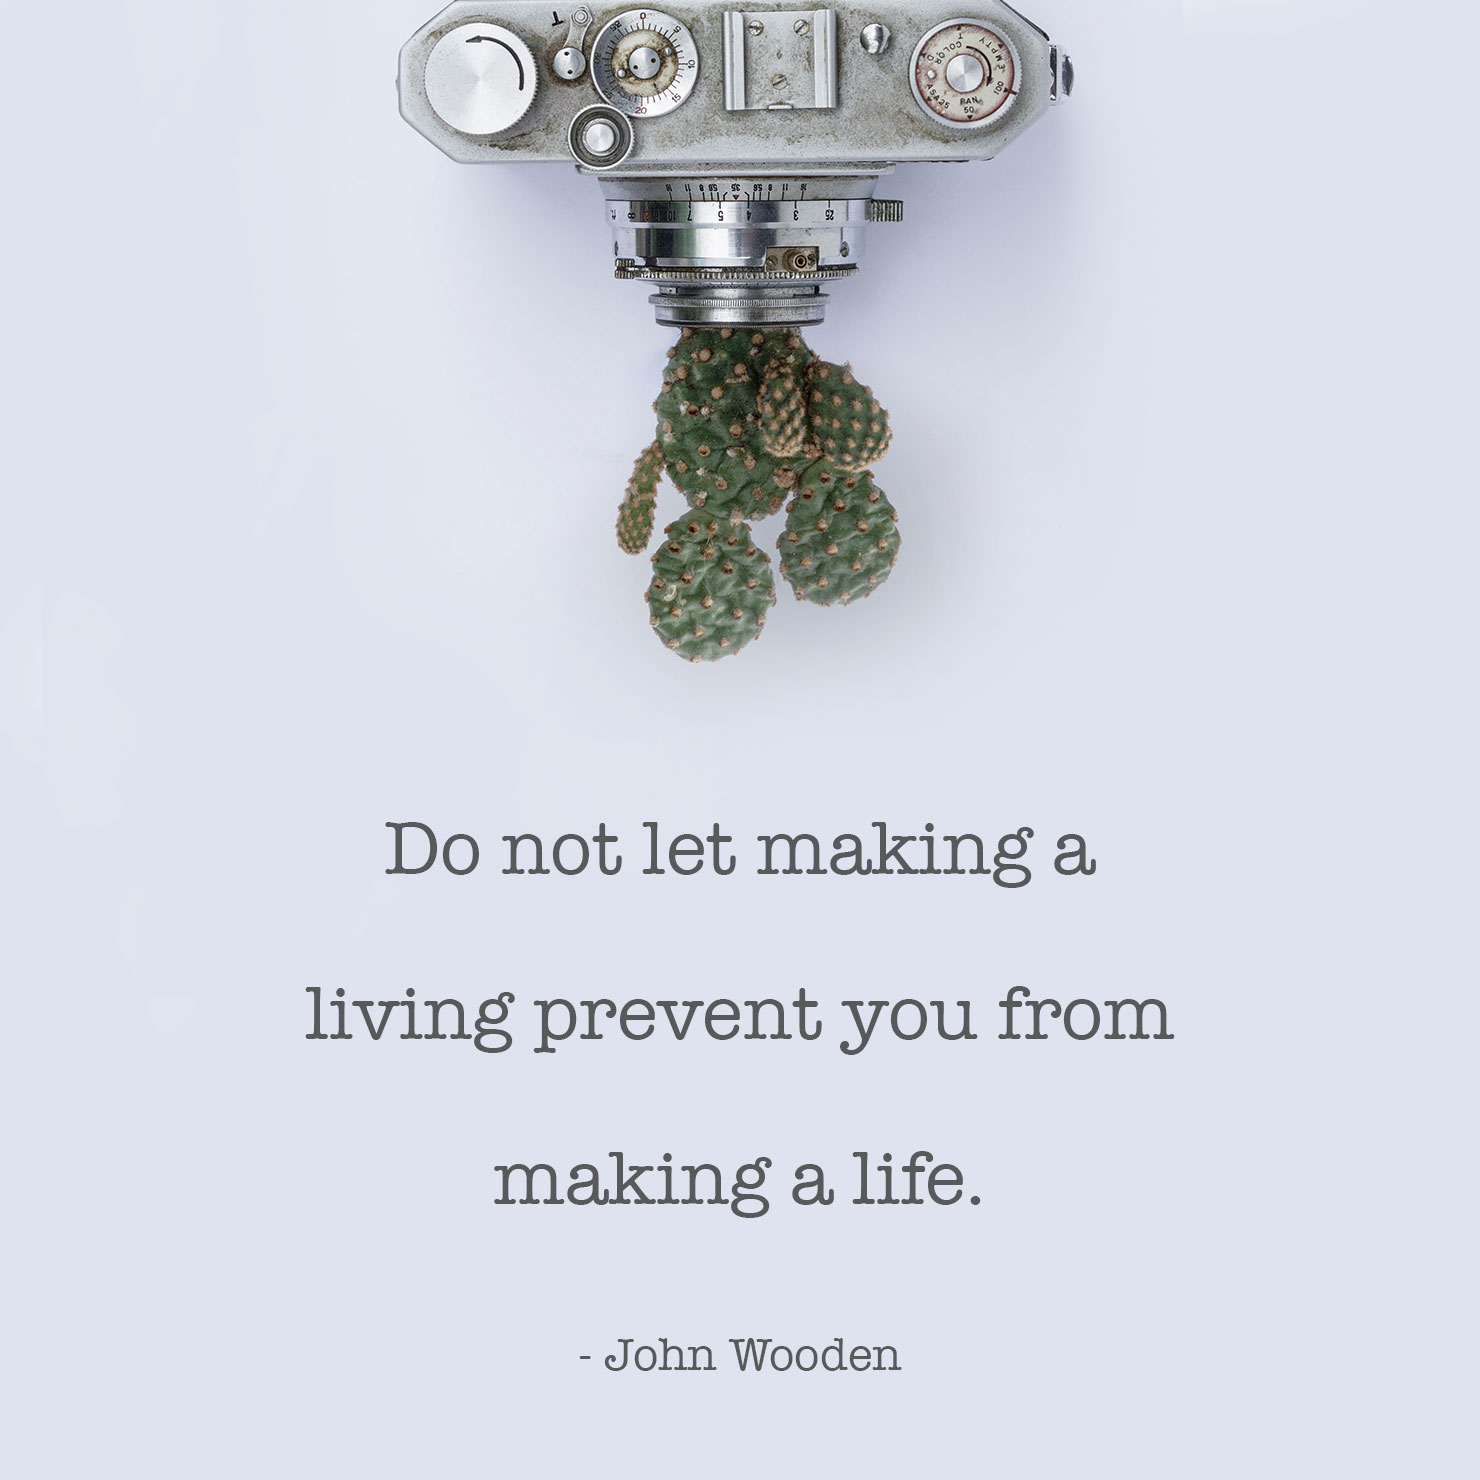 about life graduation quote: do not let making a living prevent you from making a life - John Wooden